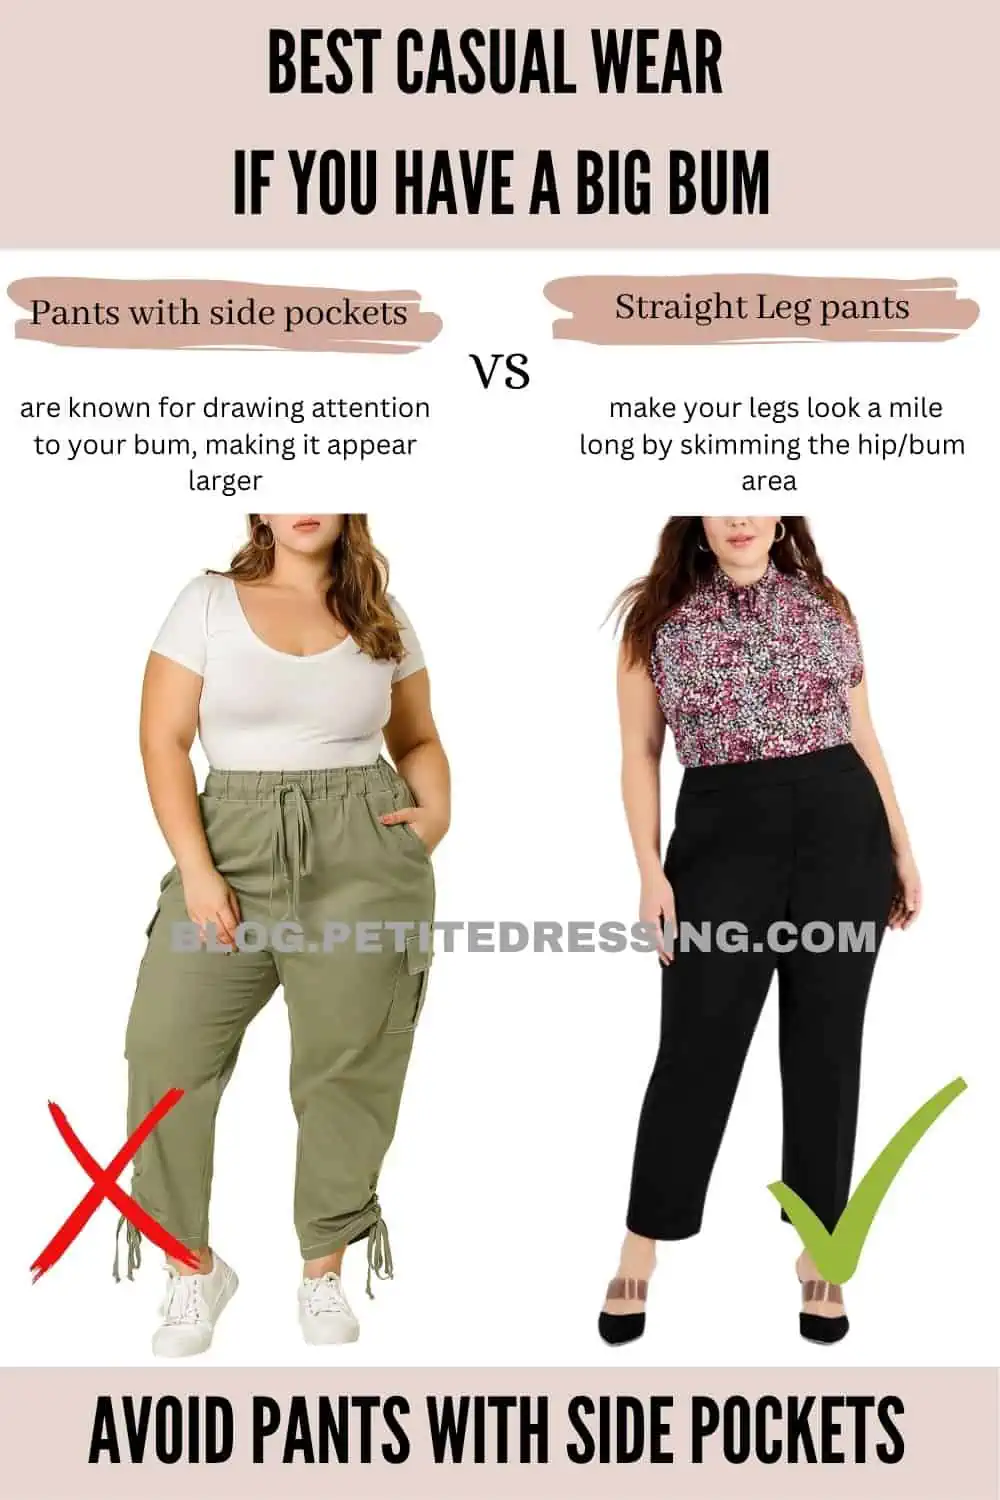 Casual wear guide if you have a big bum - Petite Dressing